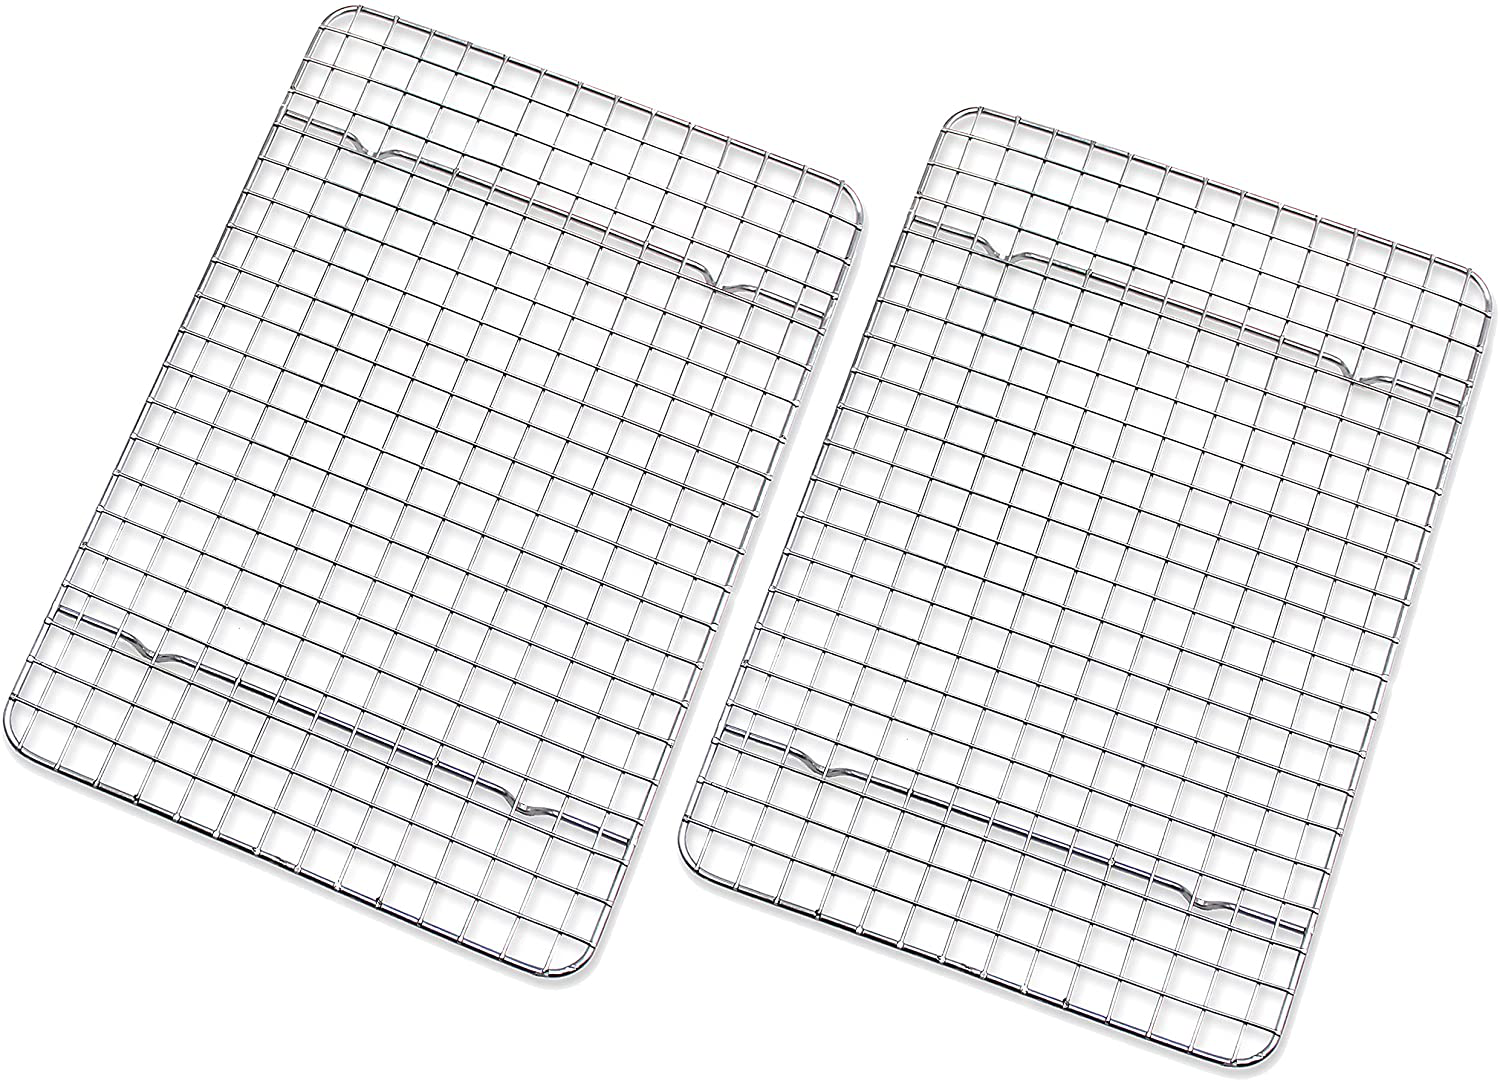 Checkered Chef Cooling Rack - Set of 2 Stainless Steel, Oven Safe Grid Wire Racks for Cooking & Baking - 8” x 11 ¾"